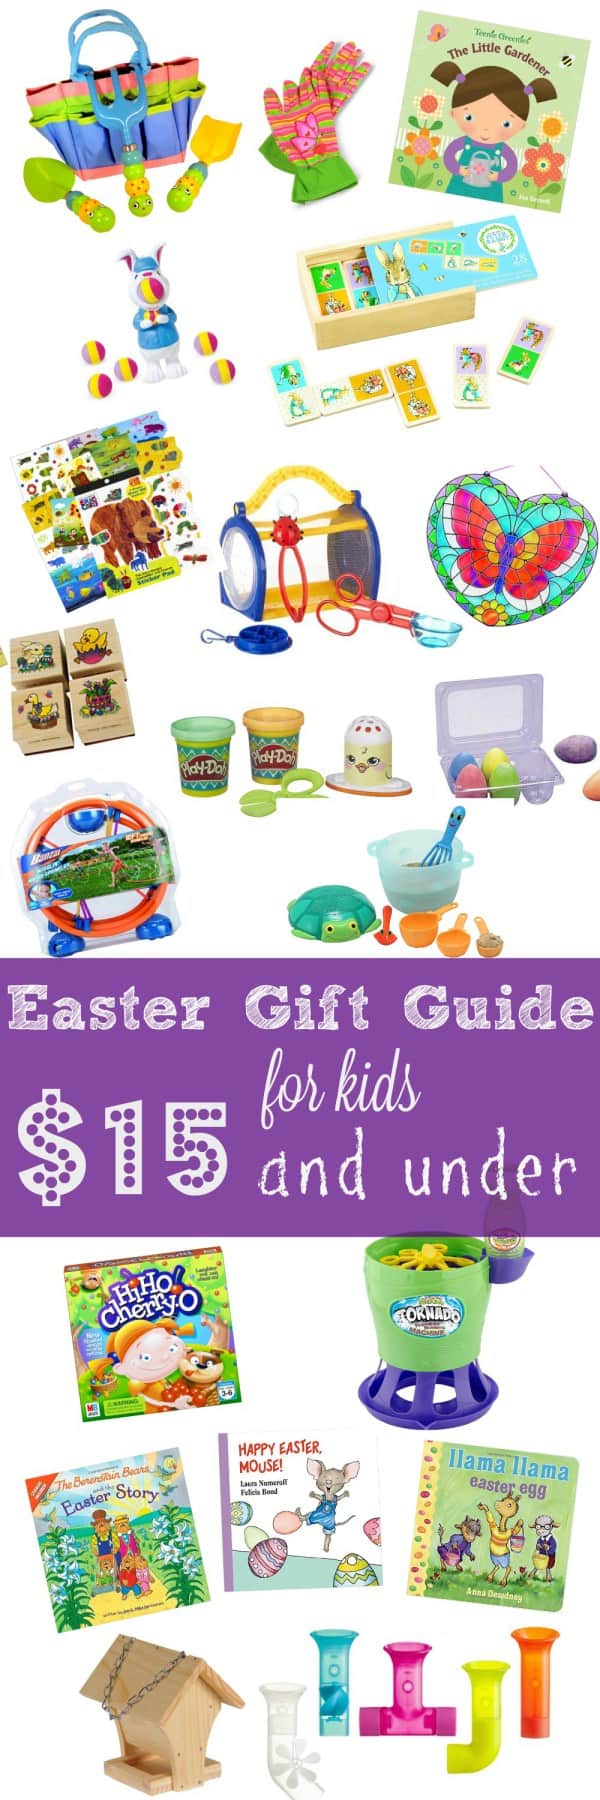 Easter Gift Guide for Kids: $15 and Under!